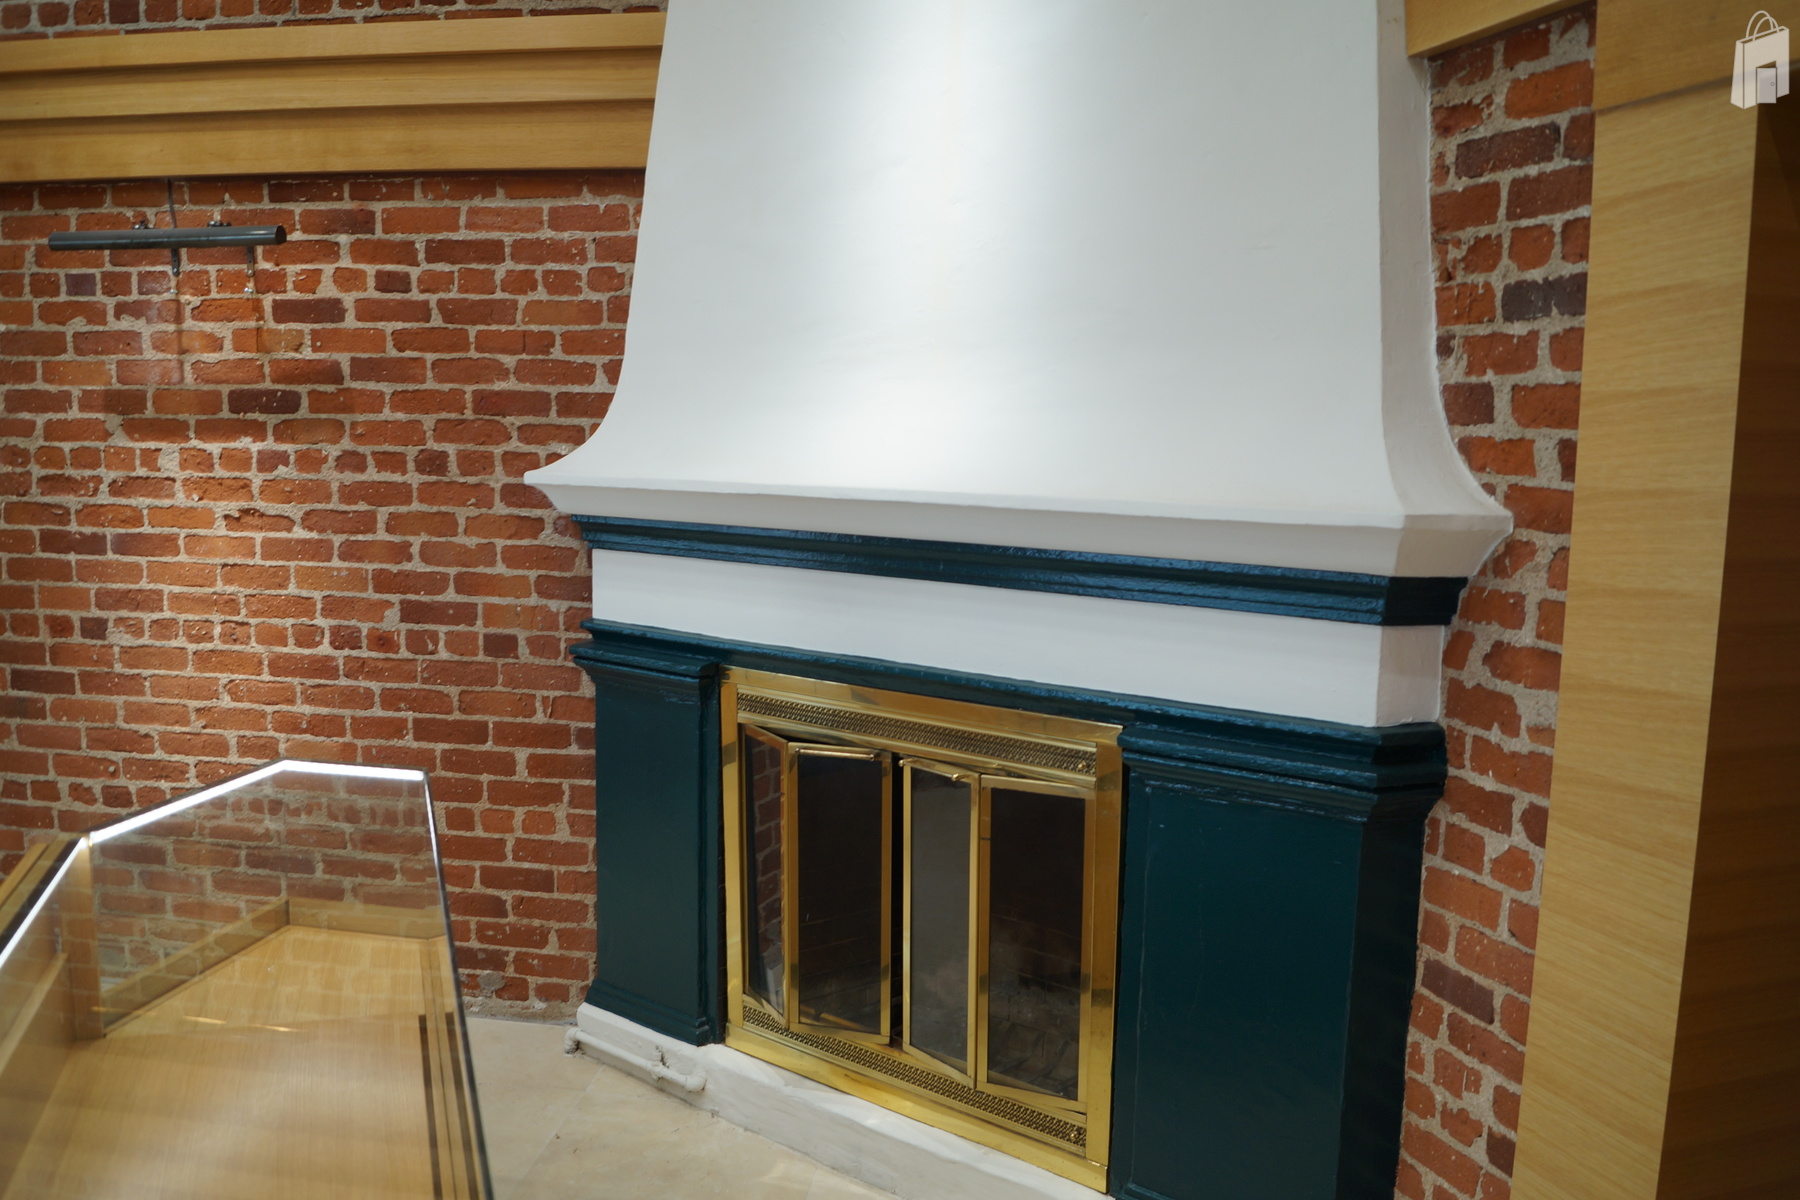 Fire Place in main Retail room